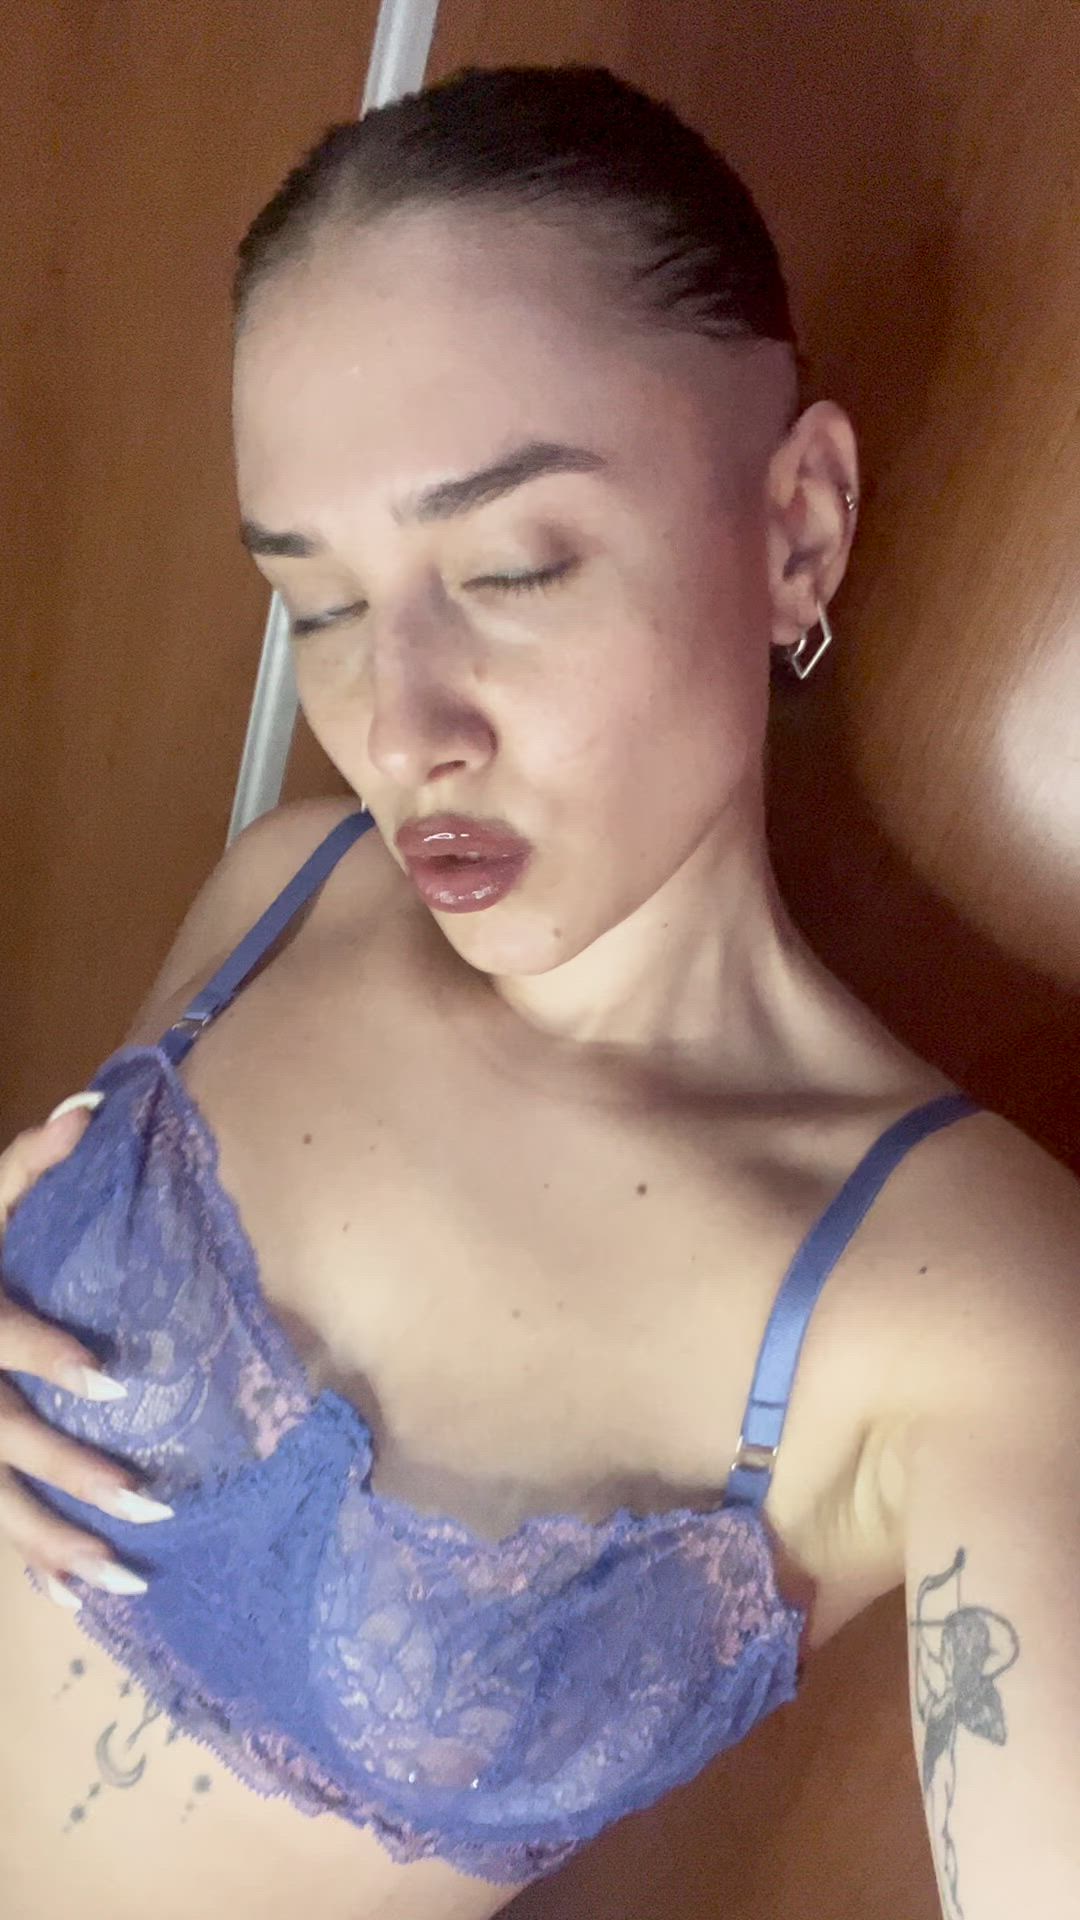 Pussy porn video with onlyfans model xddarkitty <strong>@xdarkitty</strong>